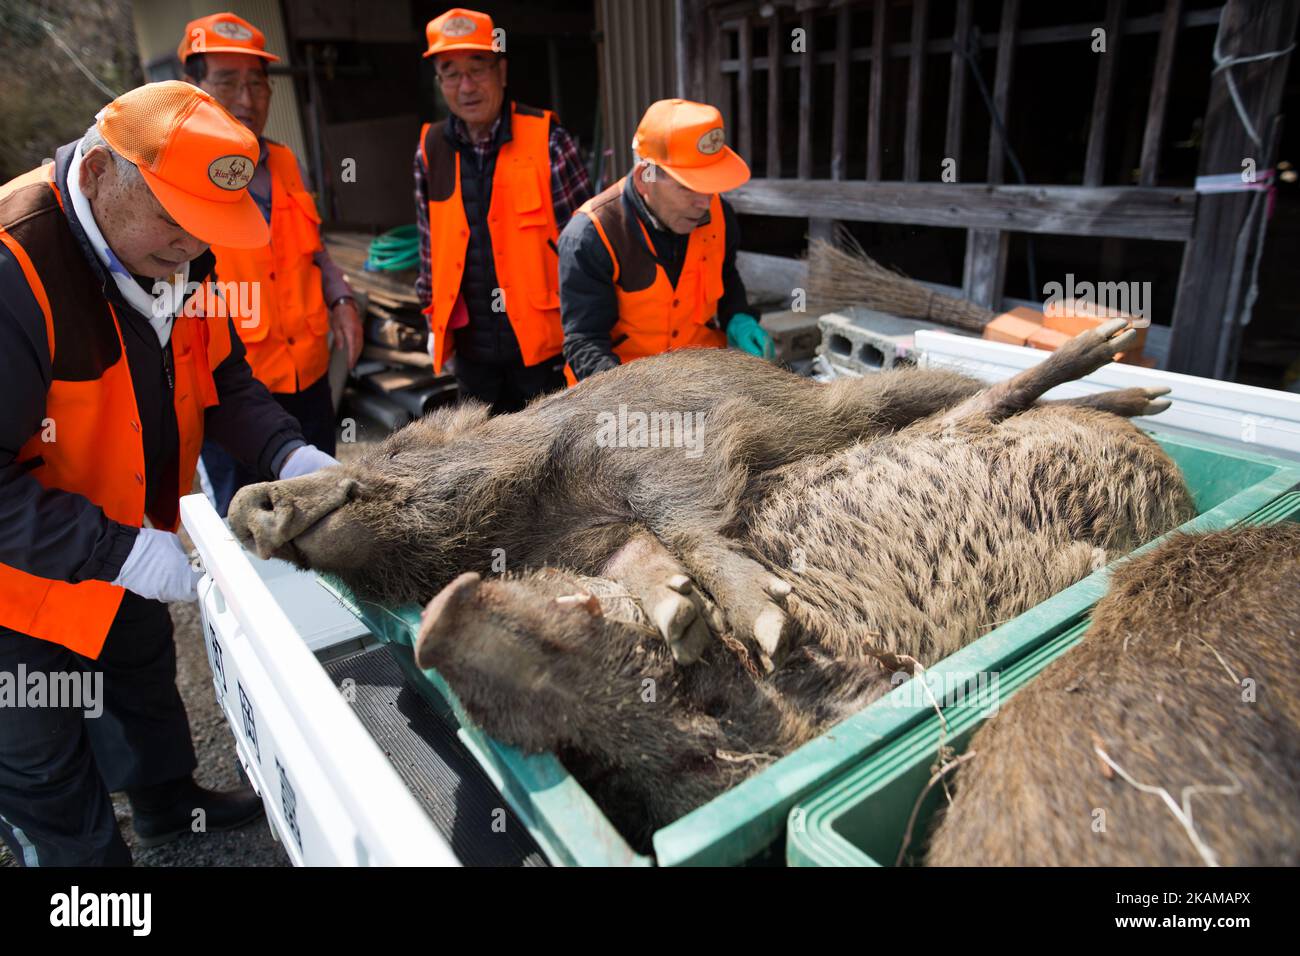 Members of Tomioka town's animal control hunters group collect the killed wild boar at a residential area near Tokyo Electric Power Co's (TEPCO) tsunami-crippled Fukushima Daiichi nuclear power plant in Tomioka town, Fukushima prefecture, Japan, March 30, 2017. (Photo by Richard Atrero de Guzman/NurPhoto) *** Please Use Credit from Credit Field *** Stock Photo